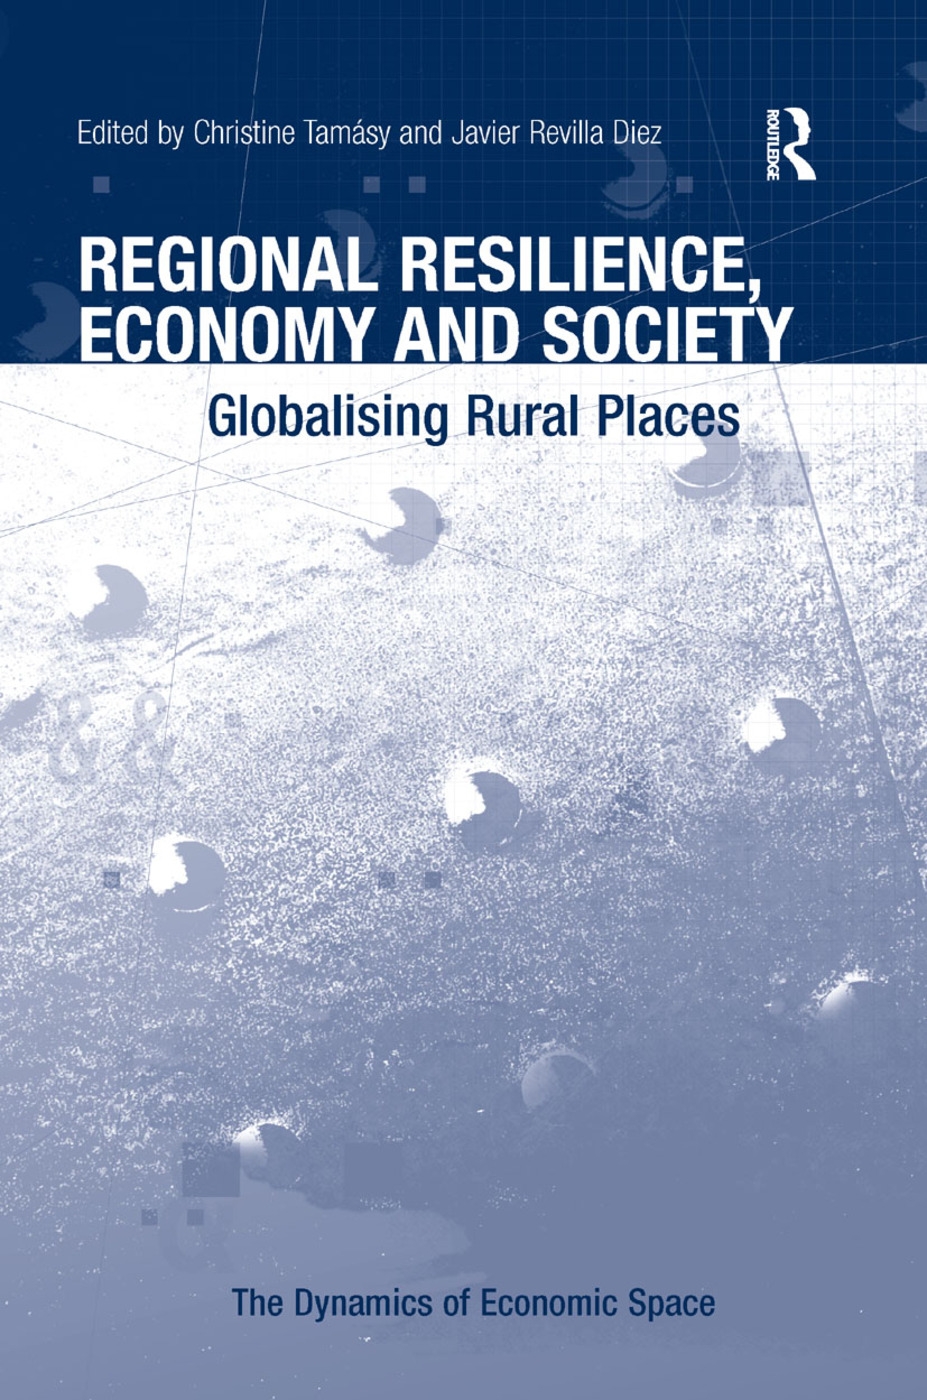 Regional Resilience, Economy and Society: Globalising Rural Places. Christine Tamsy and Javier Revilla Diez